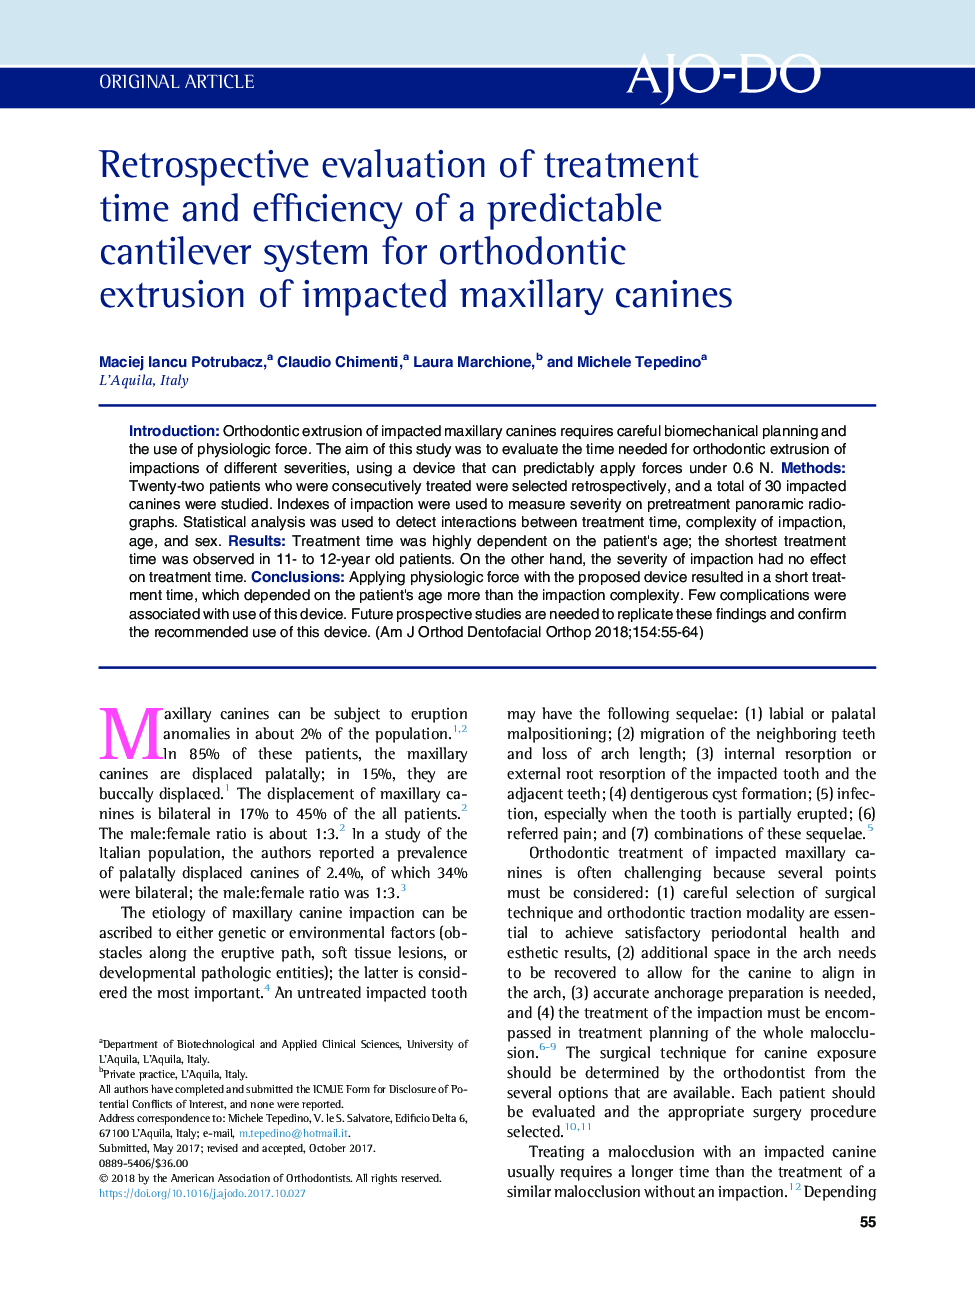 Retrospective evaluation of treatment time and efficiency of a predictable cantilever system for orthodontic extrusion of impacted maxillary canines